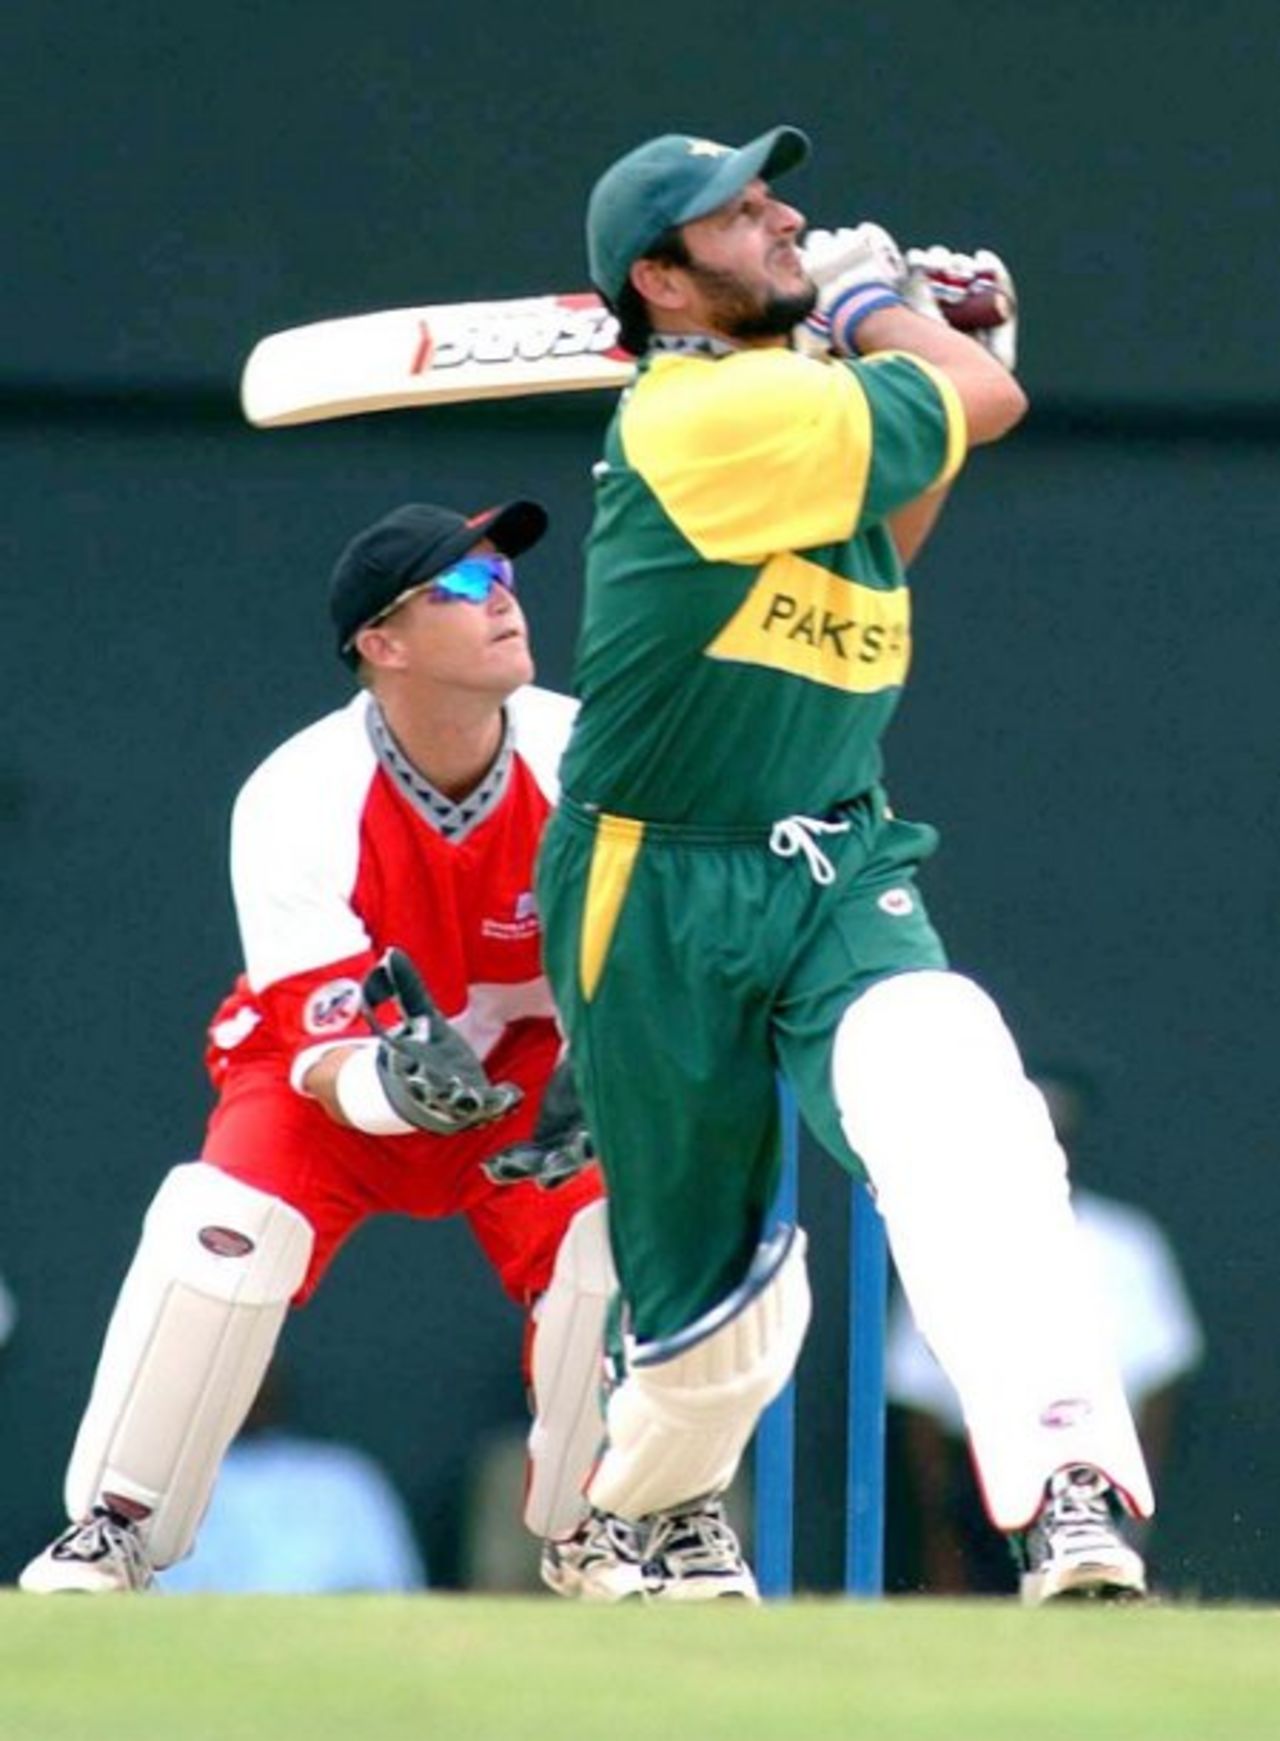 Shahid Afridi hits another six during the Double Wicket World Championship, 4-6 April 2003 (courtesy St.Lucia Tourist Board)